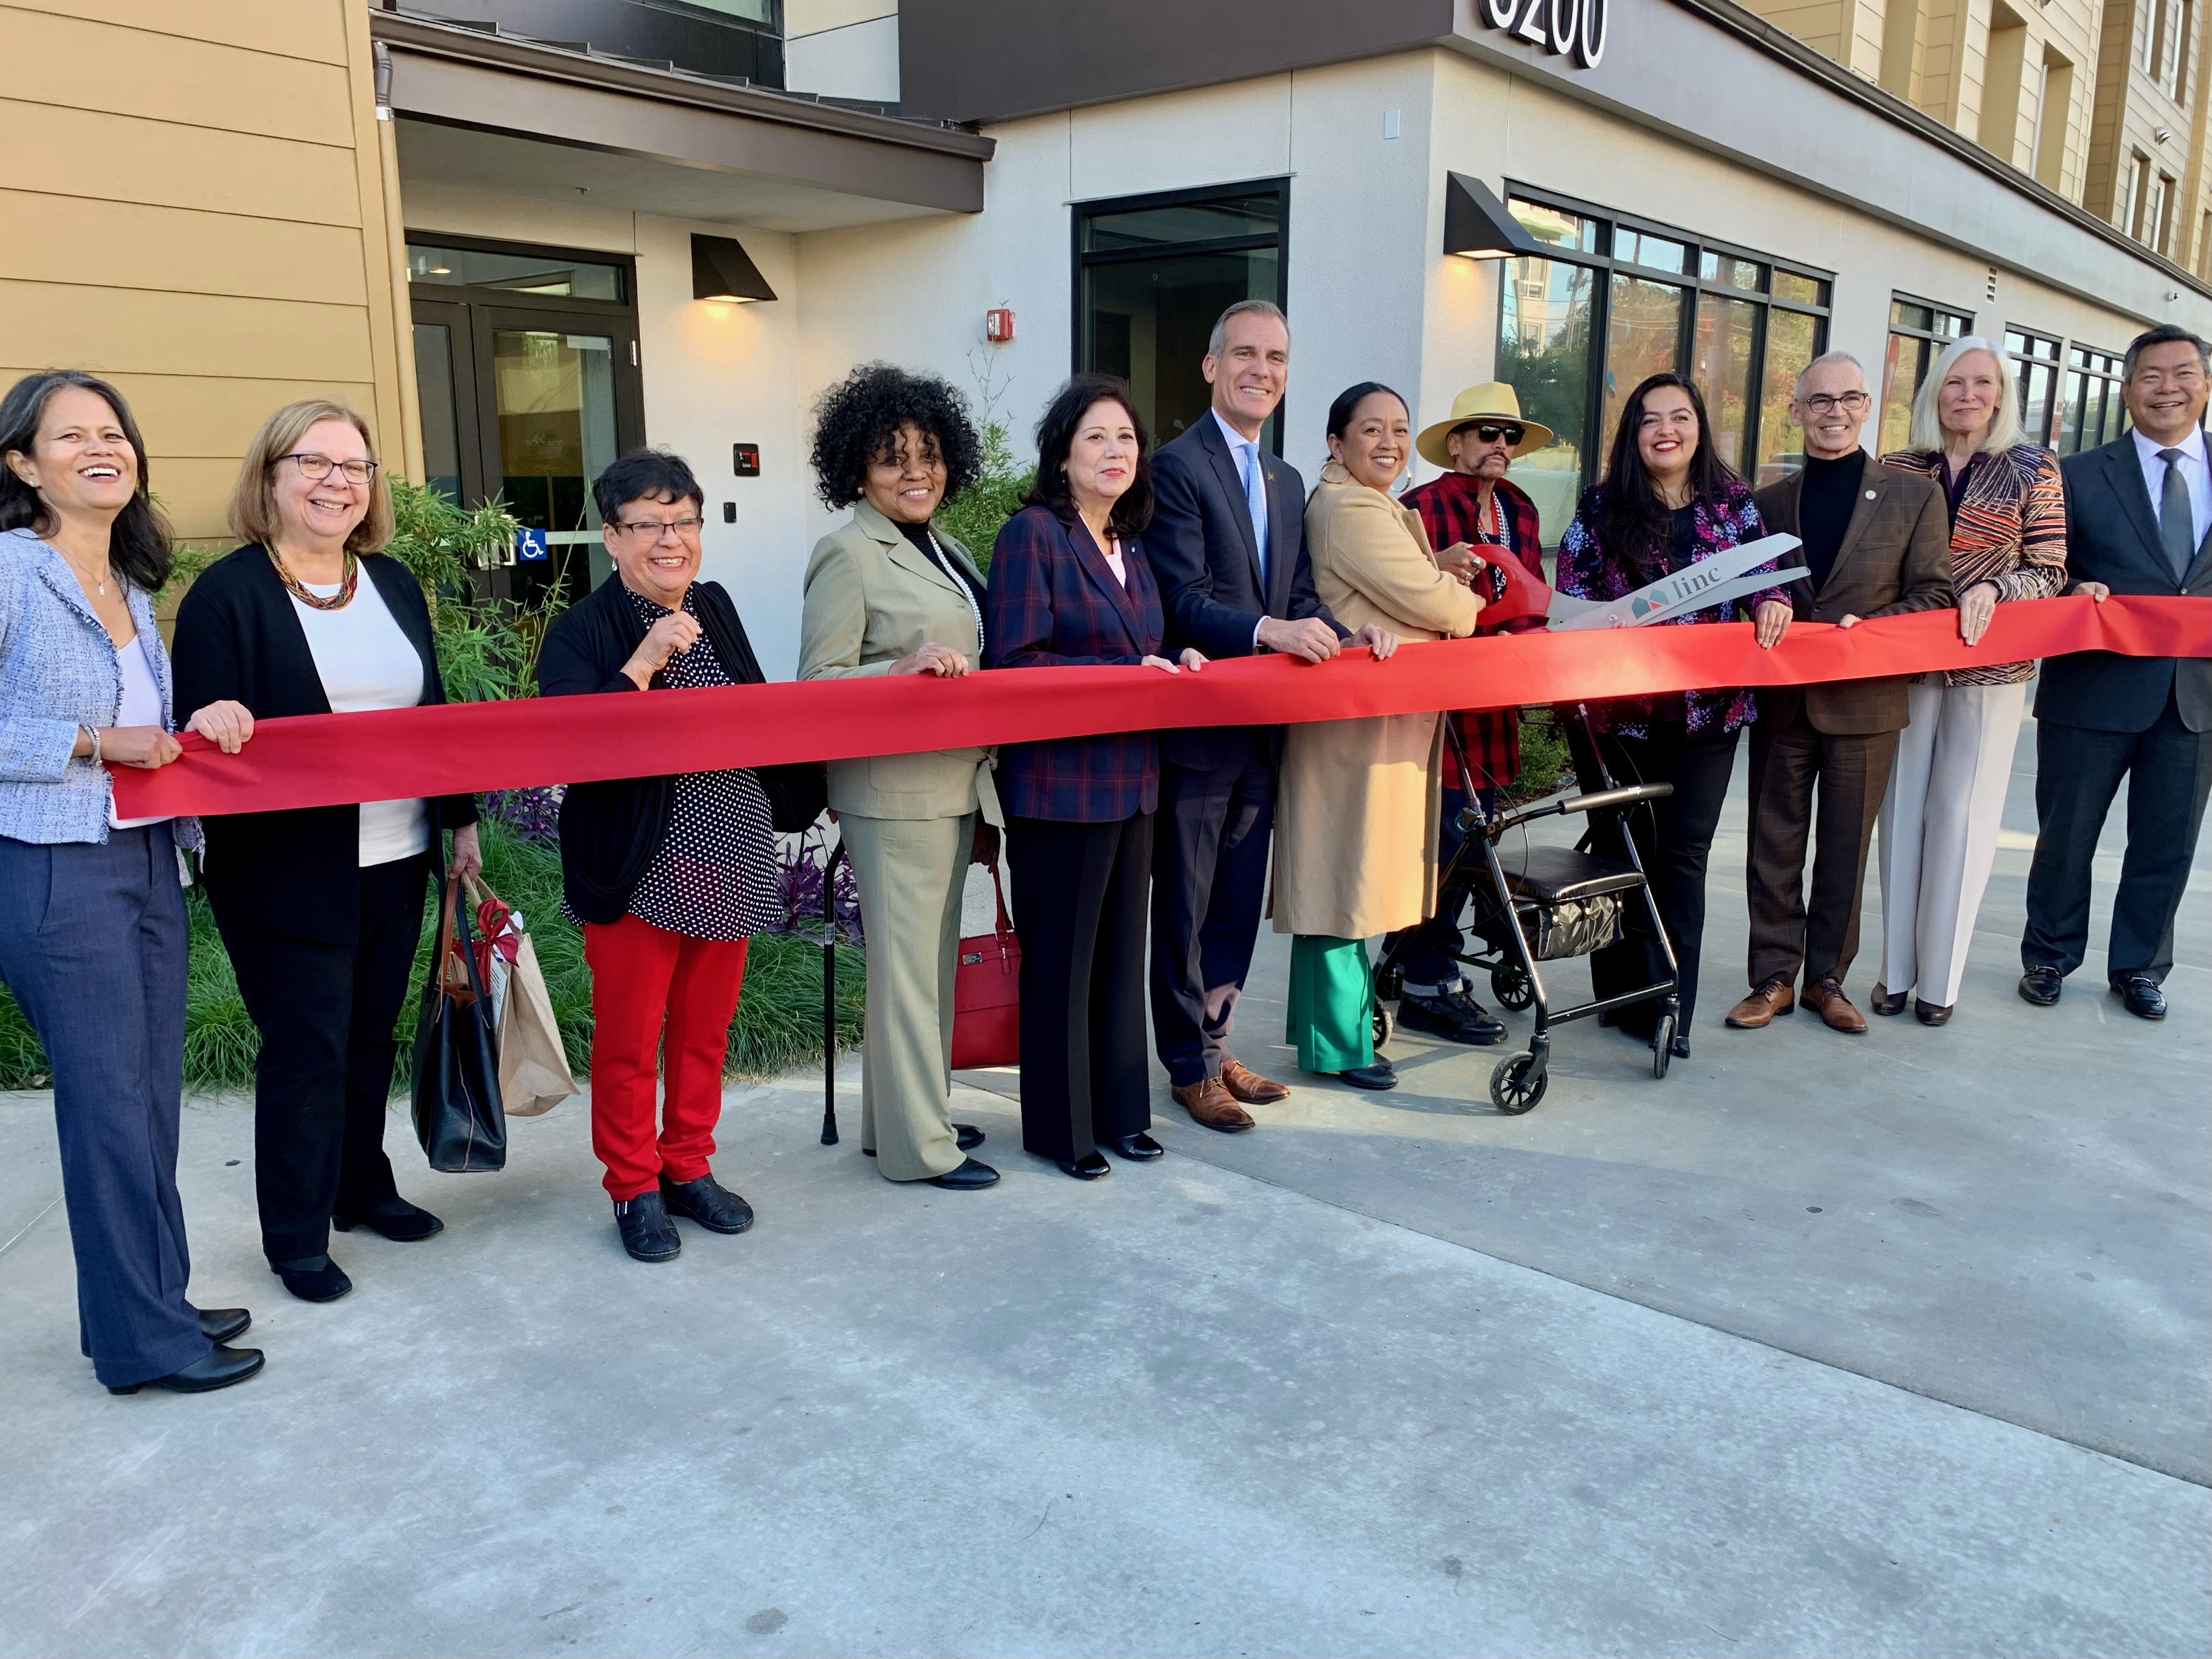 Calif Assemblywoman Wendy Carrillo, LA County Supervisor Solis, LA Mayor Garcetti and Councilmember O’Farrell joined Linc, SIPA and the new residents to celebrate the grand opening of HiFi Collective.